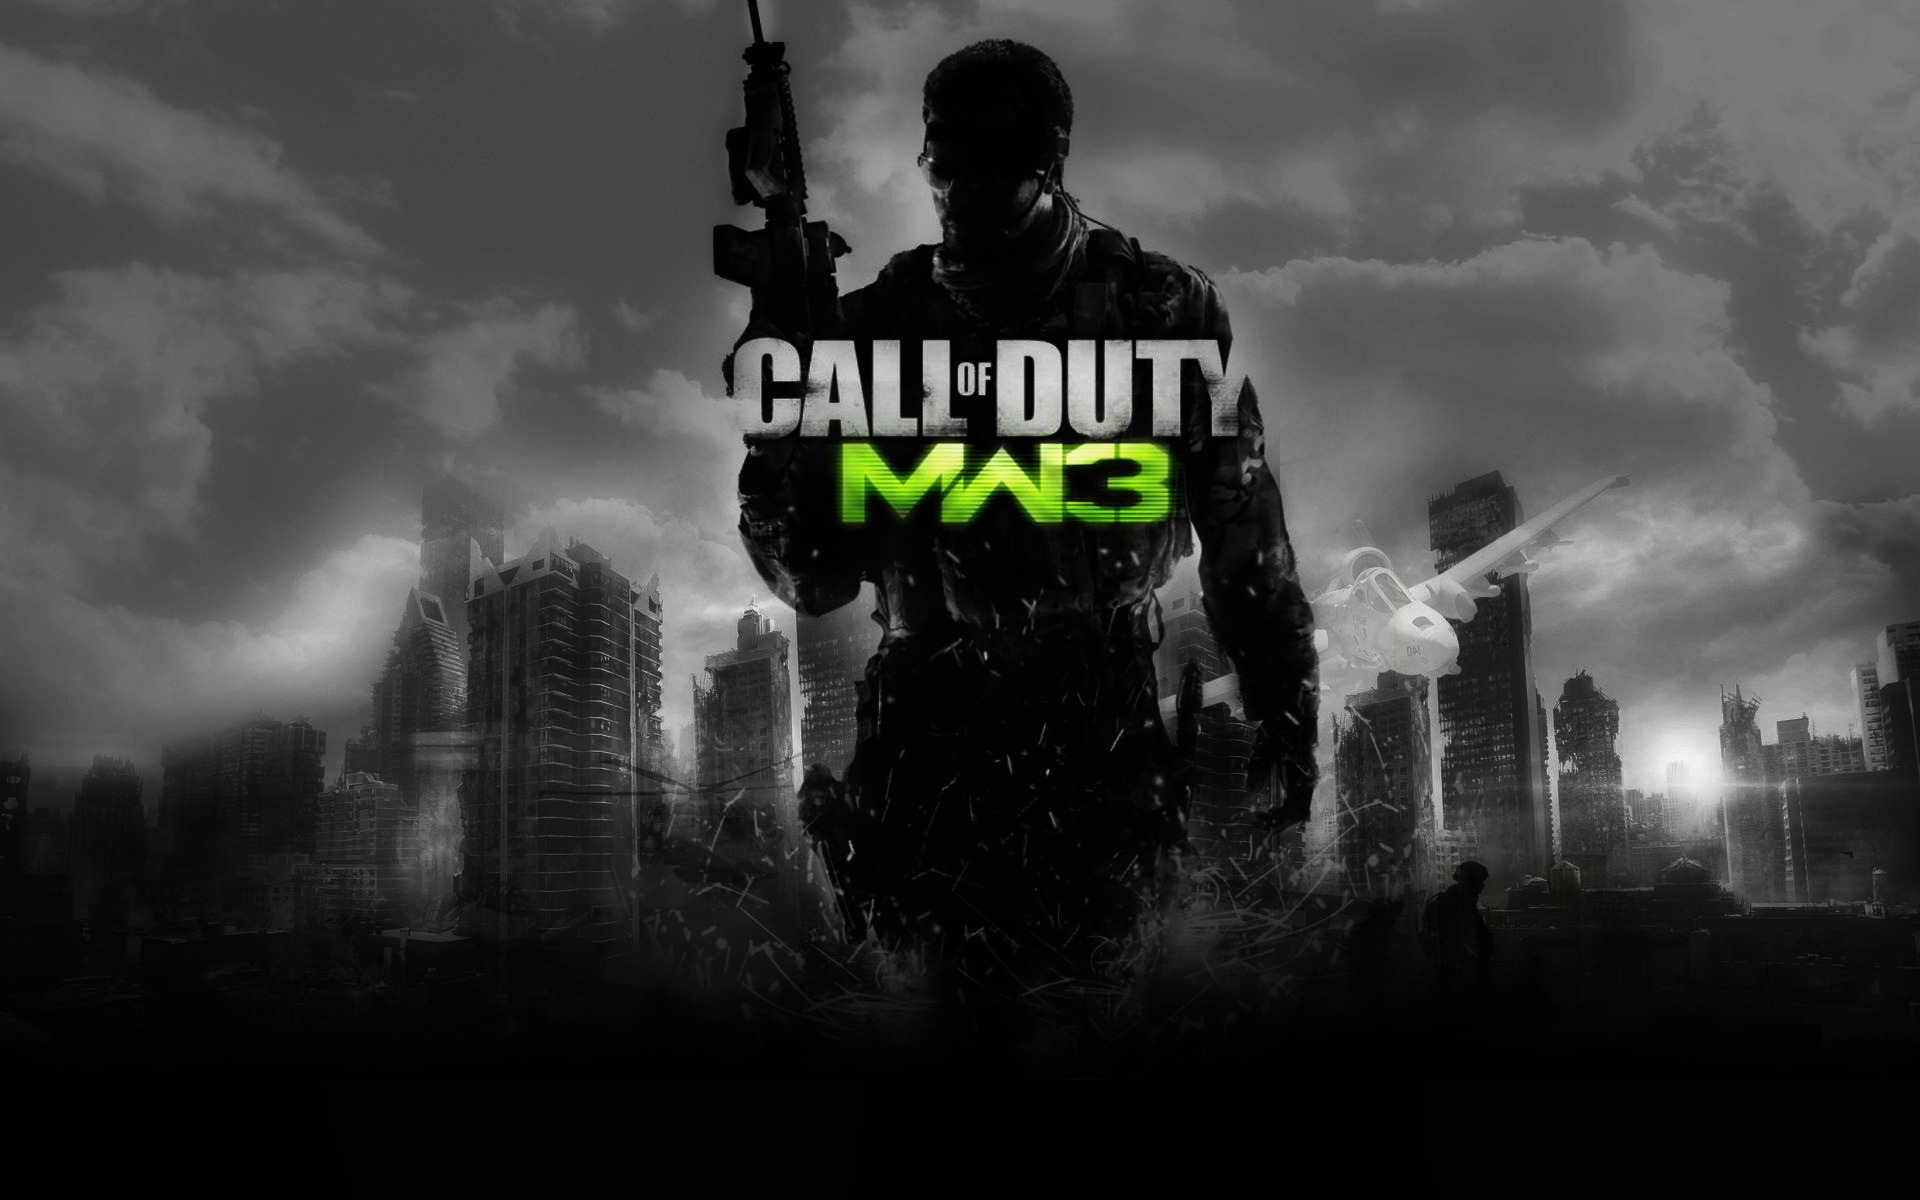 Le guide des soluces Call of Duty Modern Warfare 3